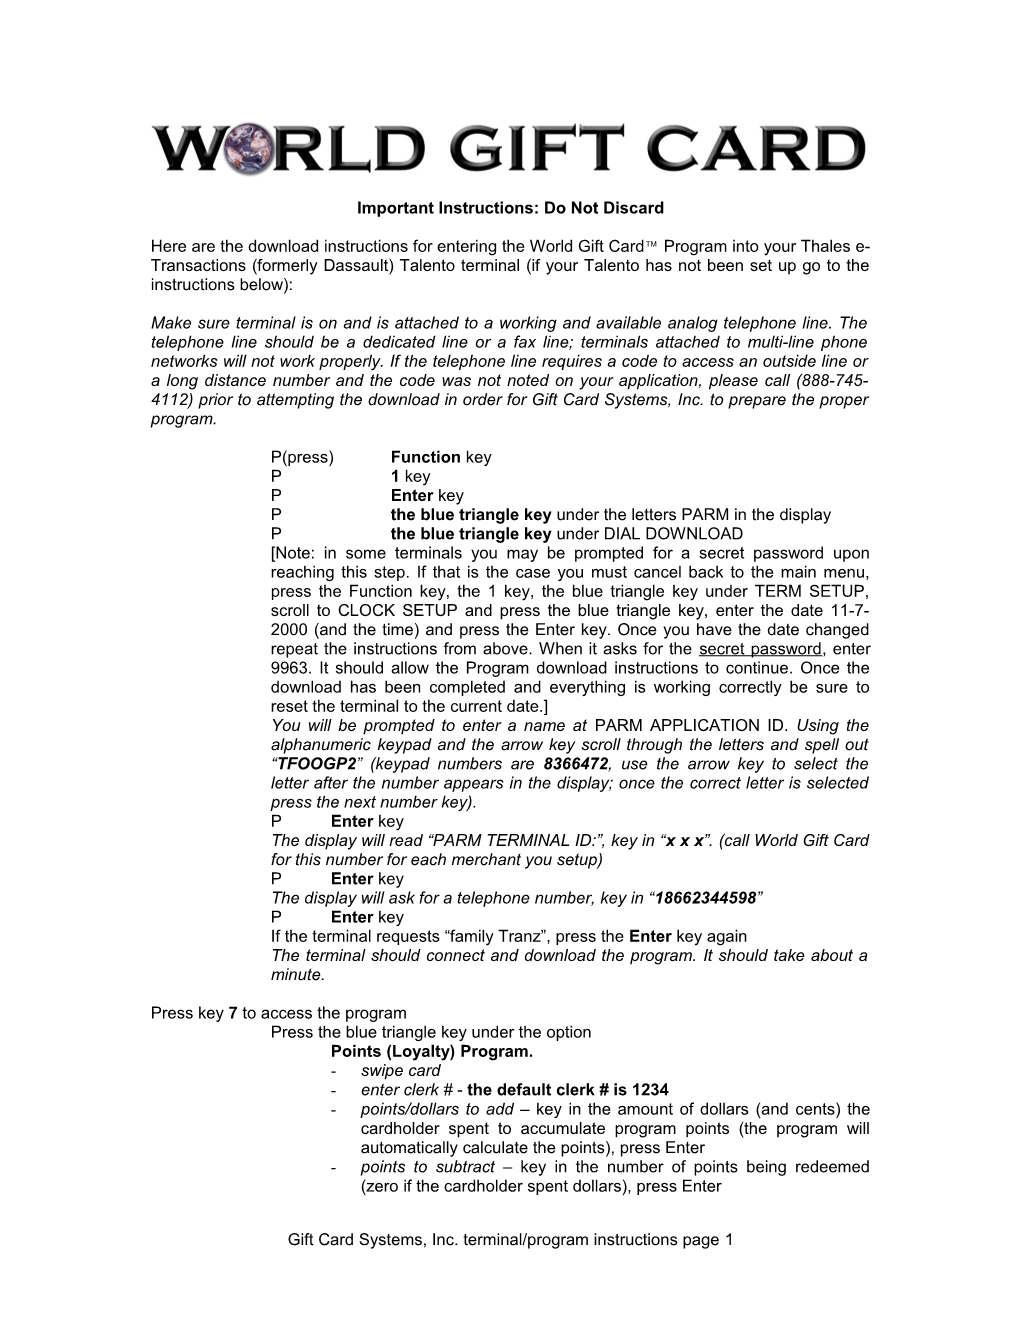 Here Are the Download Instructions for Entering the World Gift Cardtm Program Into Your